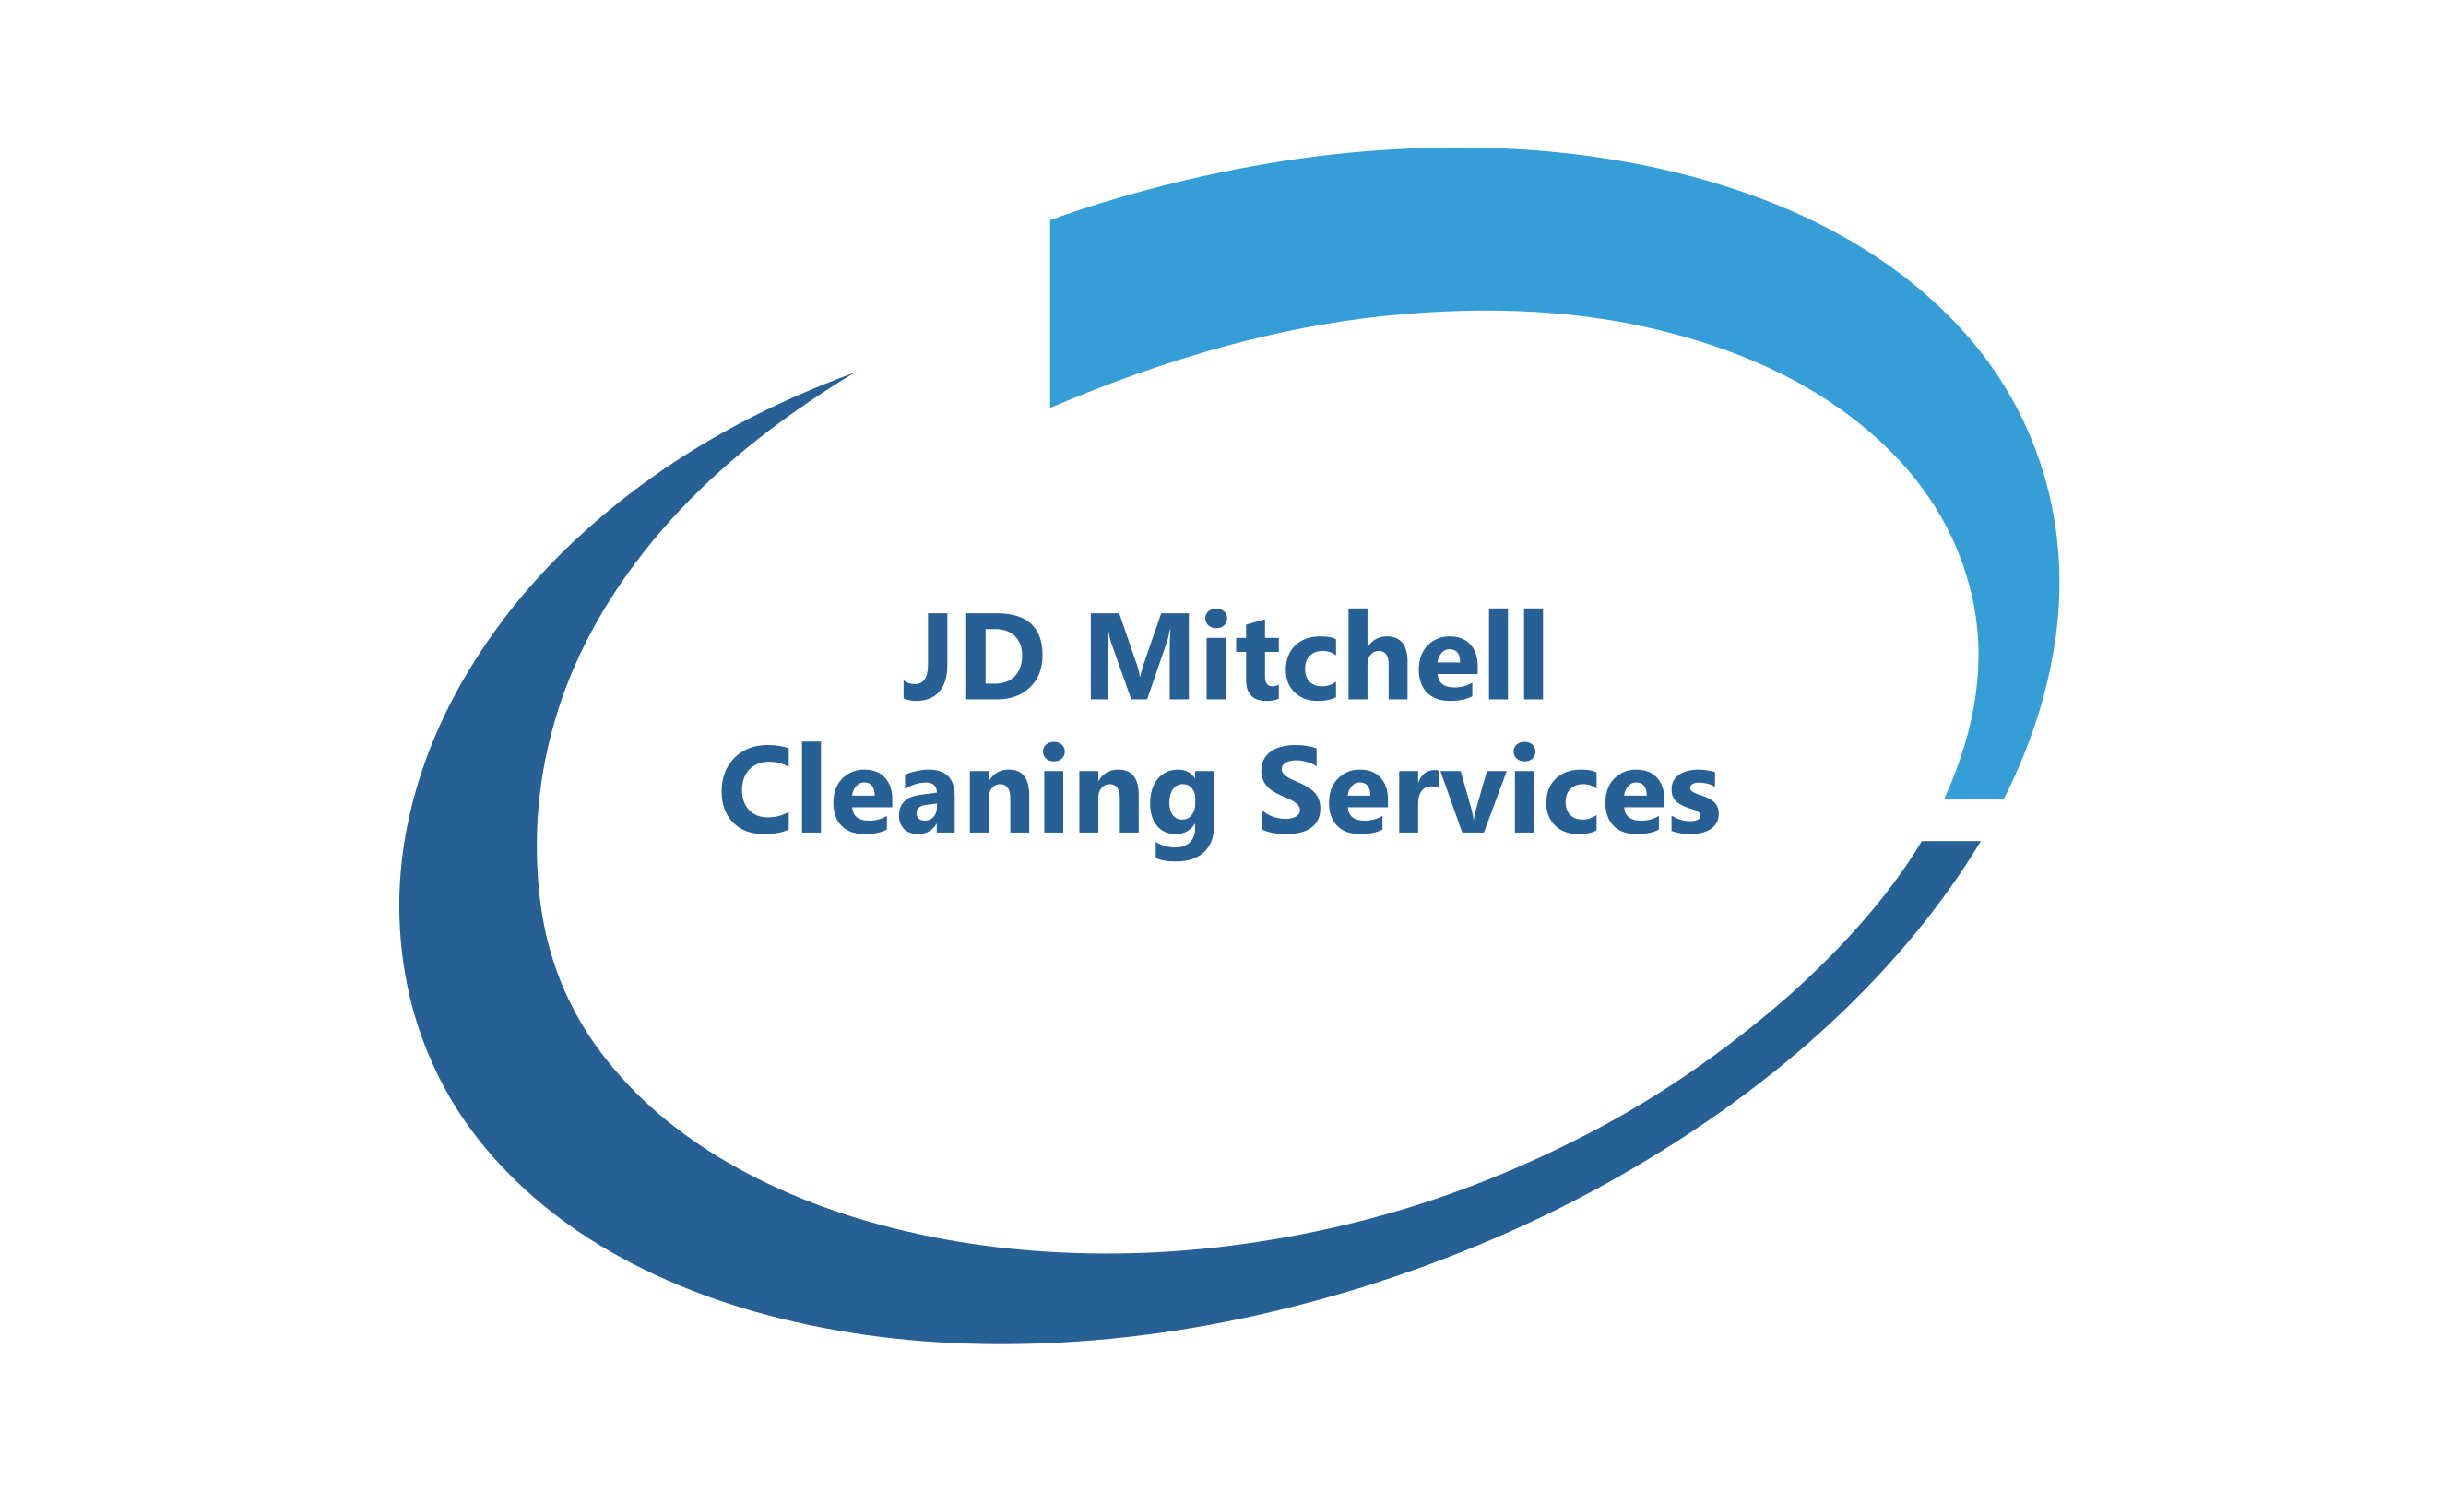 JD Mitchell Cleaning Services Logo